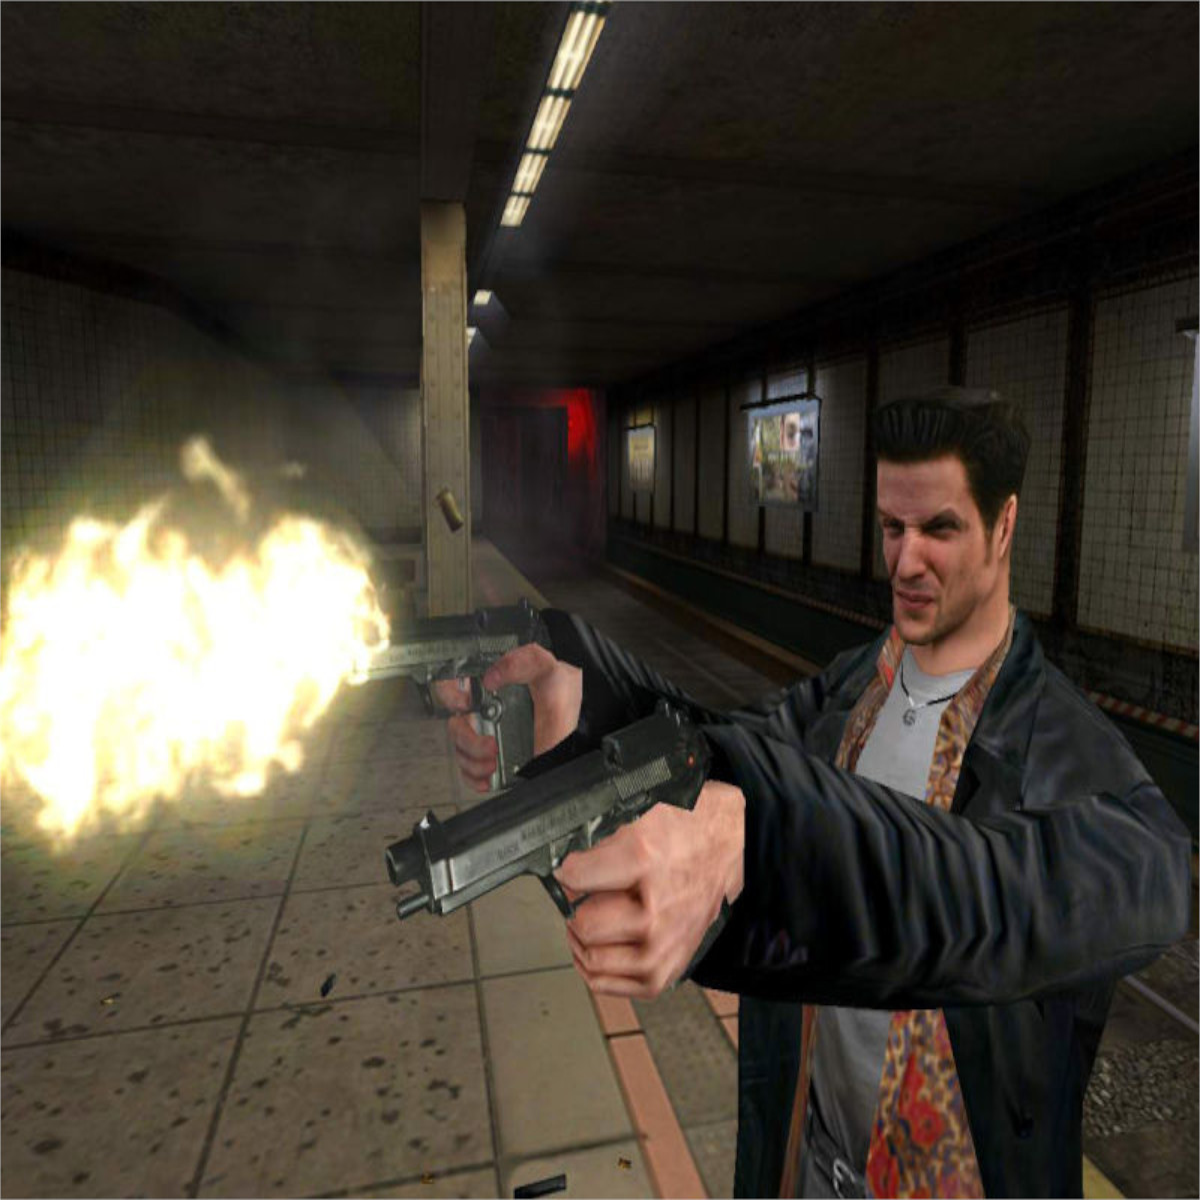 Potential first look at next gen Max Payne model ahead of Remake